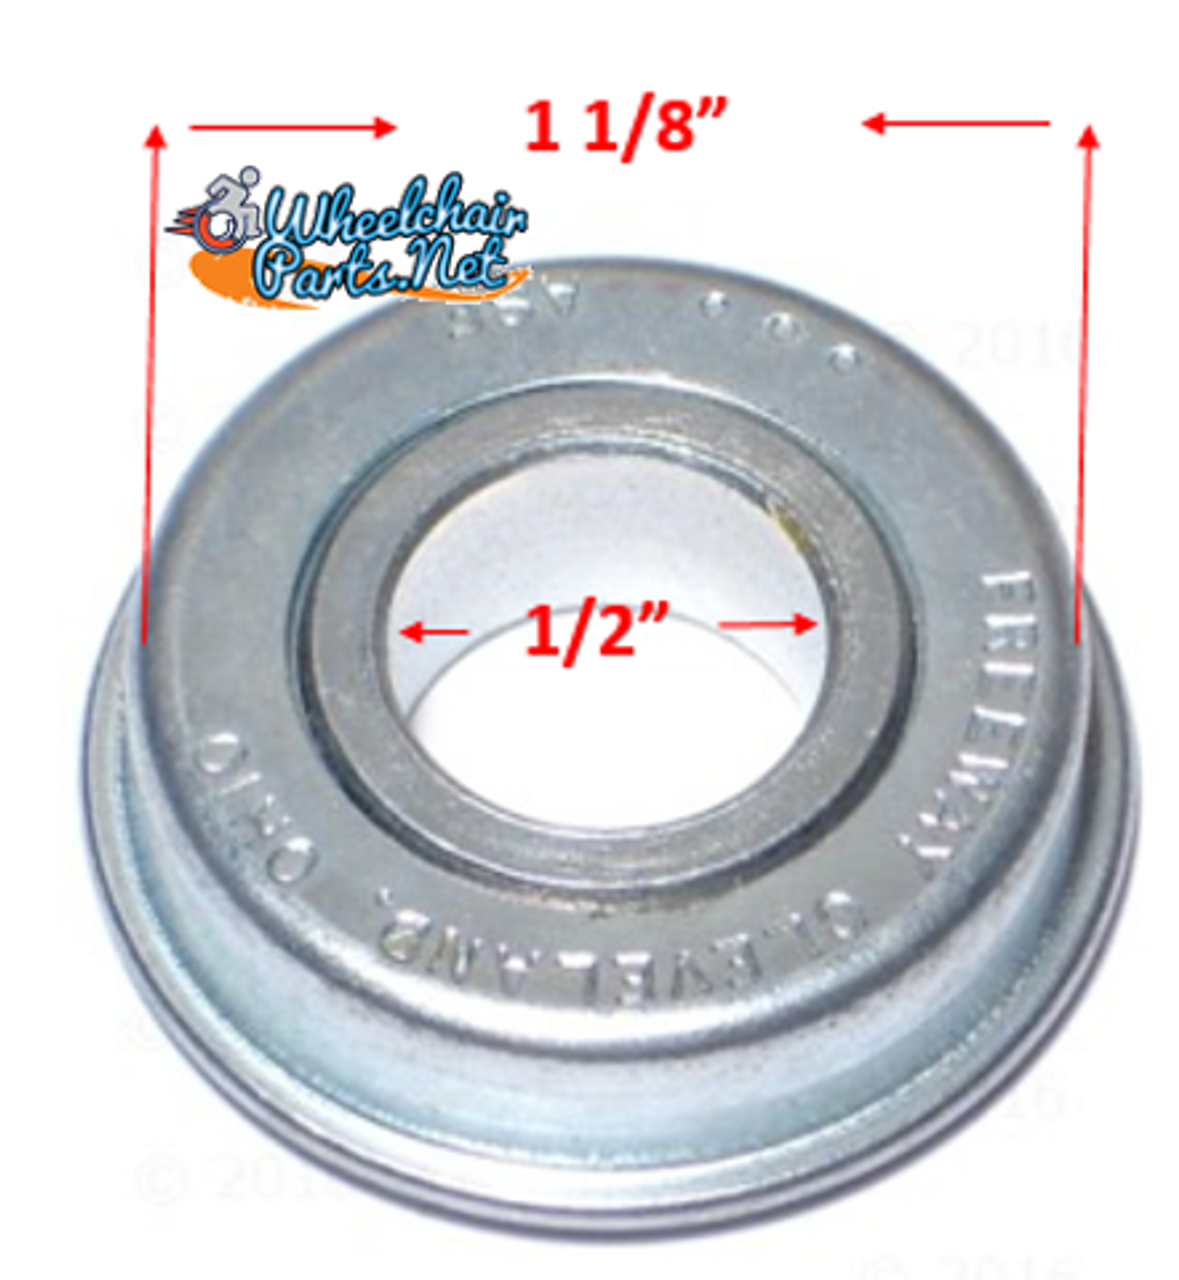 B85P- 1/2 x 1 1/8"  FLANGED CASTER STEM AND REAR WHEEL BEARING. Sold as Pack of 4